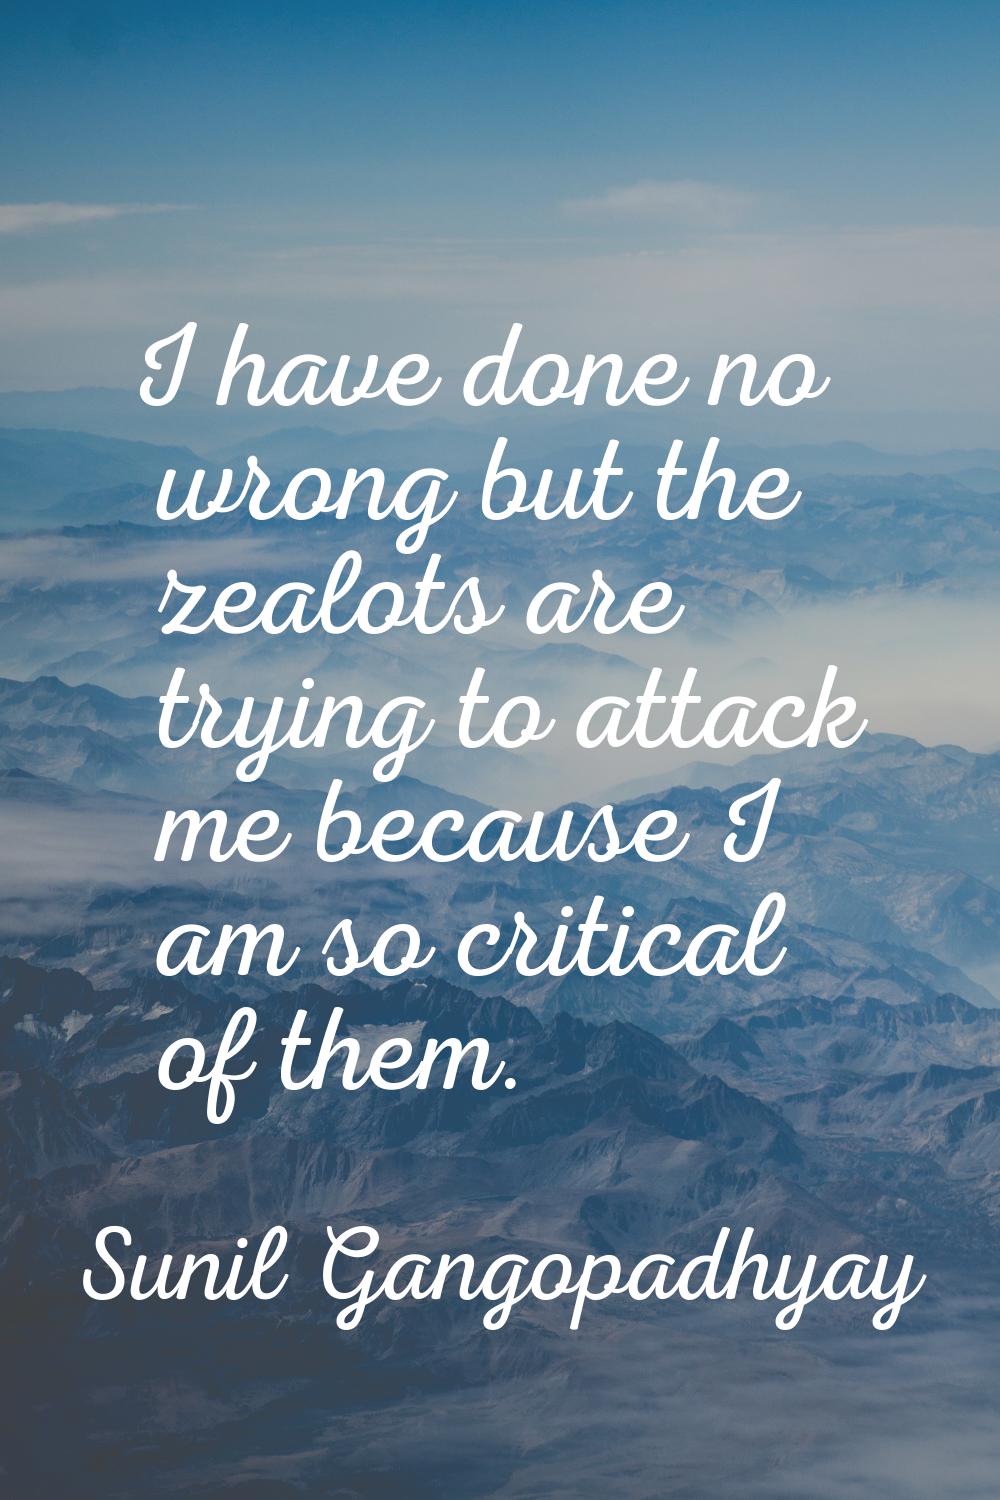 I have done no wrong but the zealots are trying to attack me because I am so critical of them.